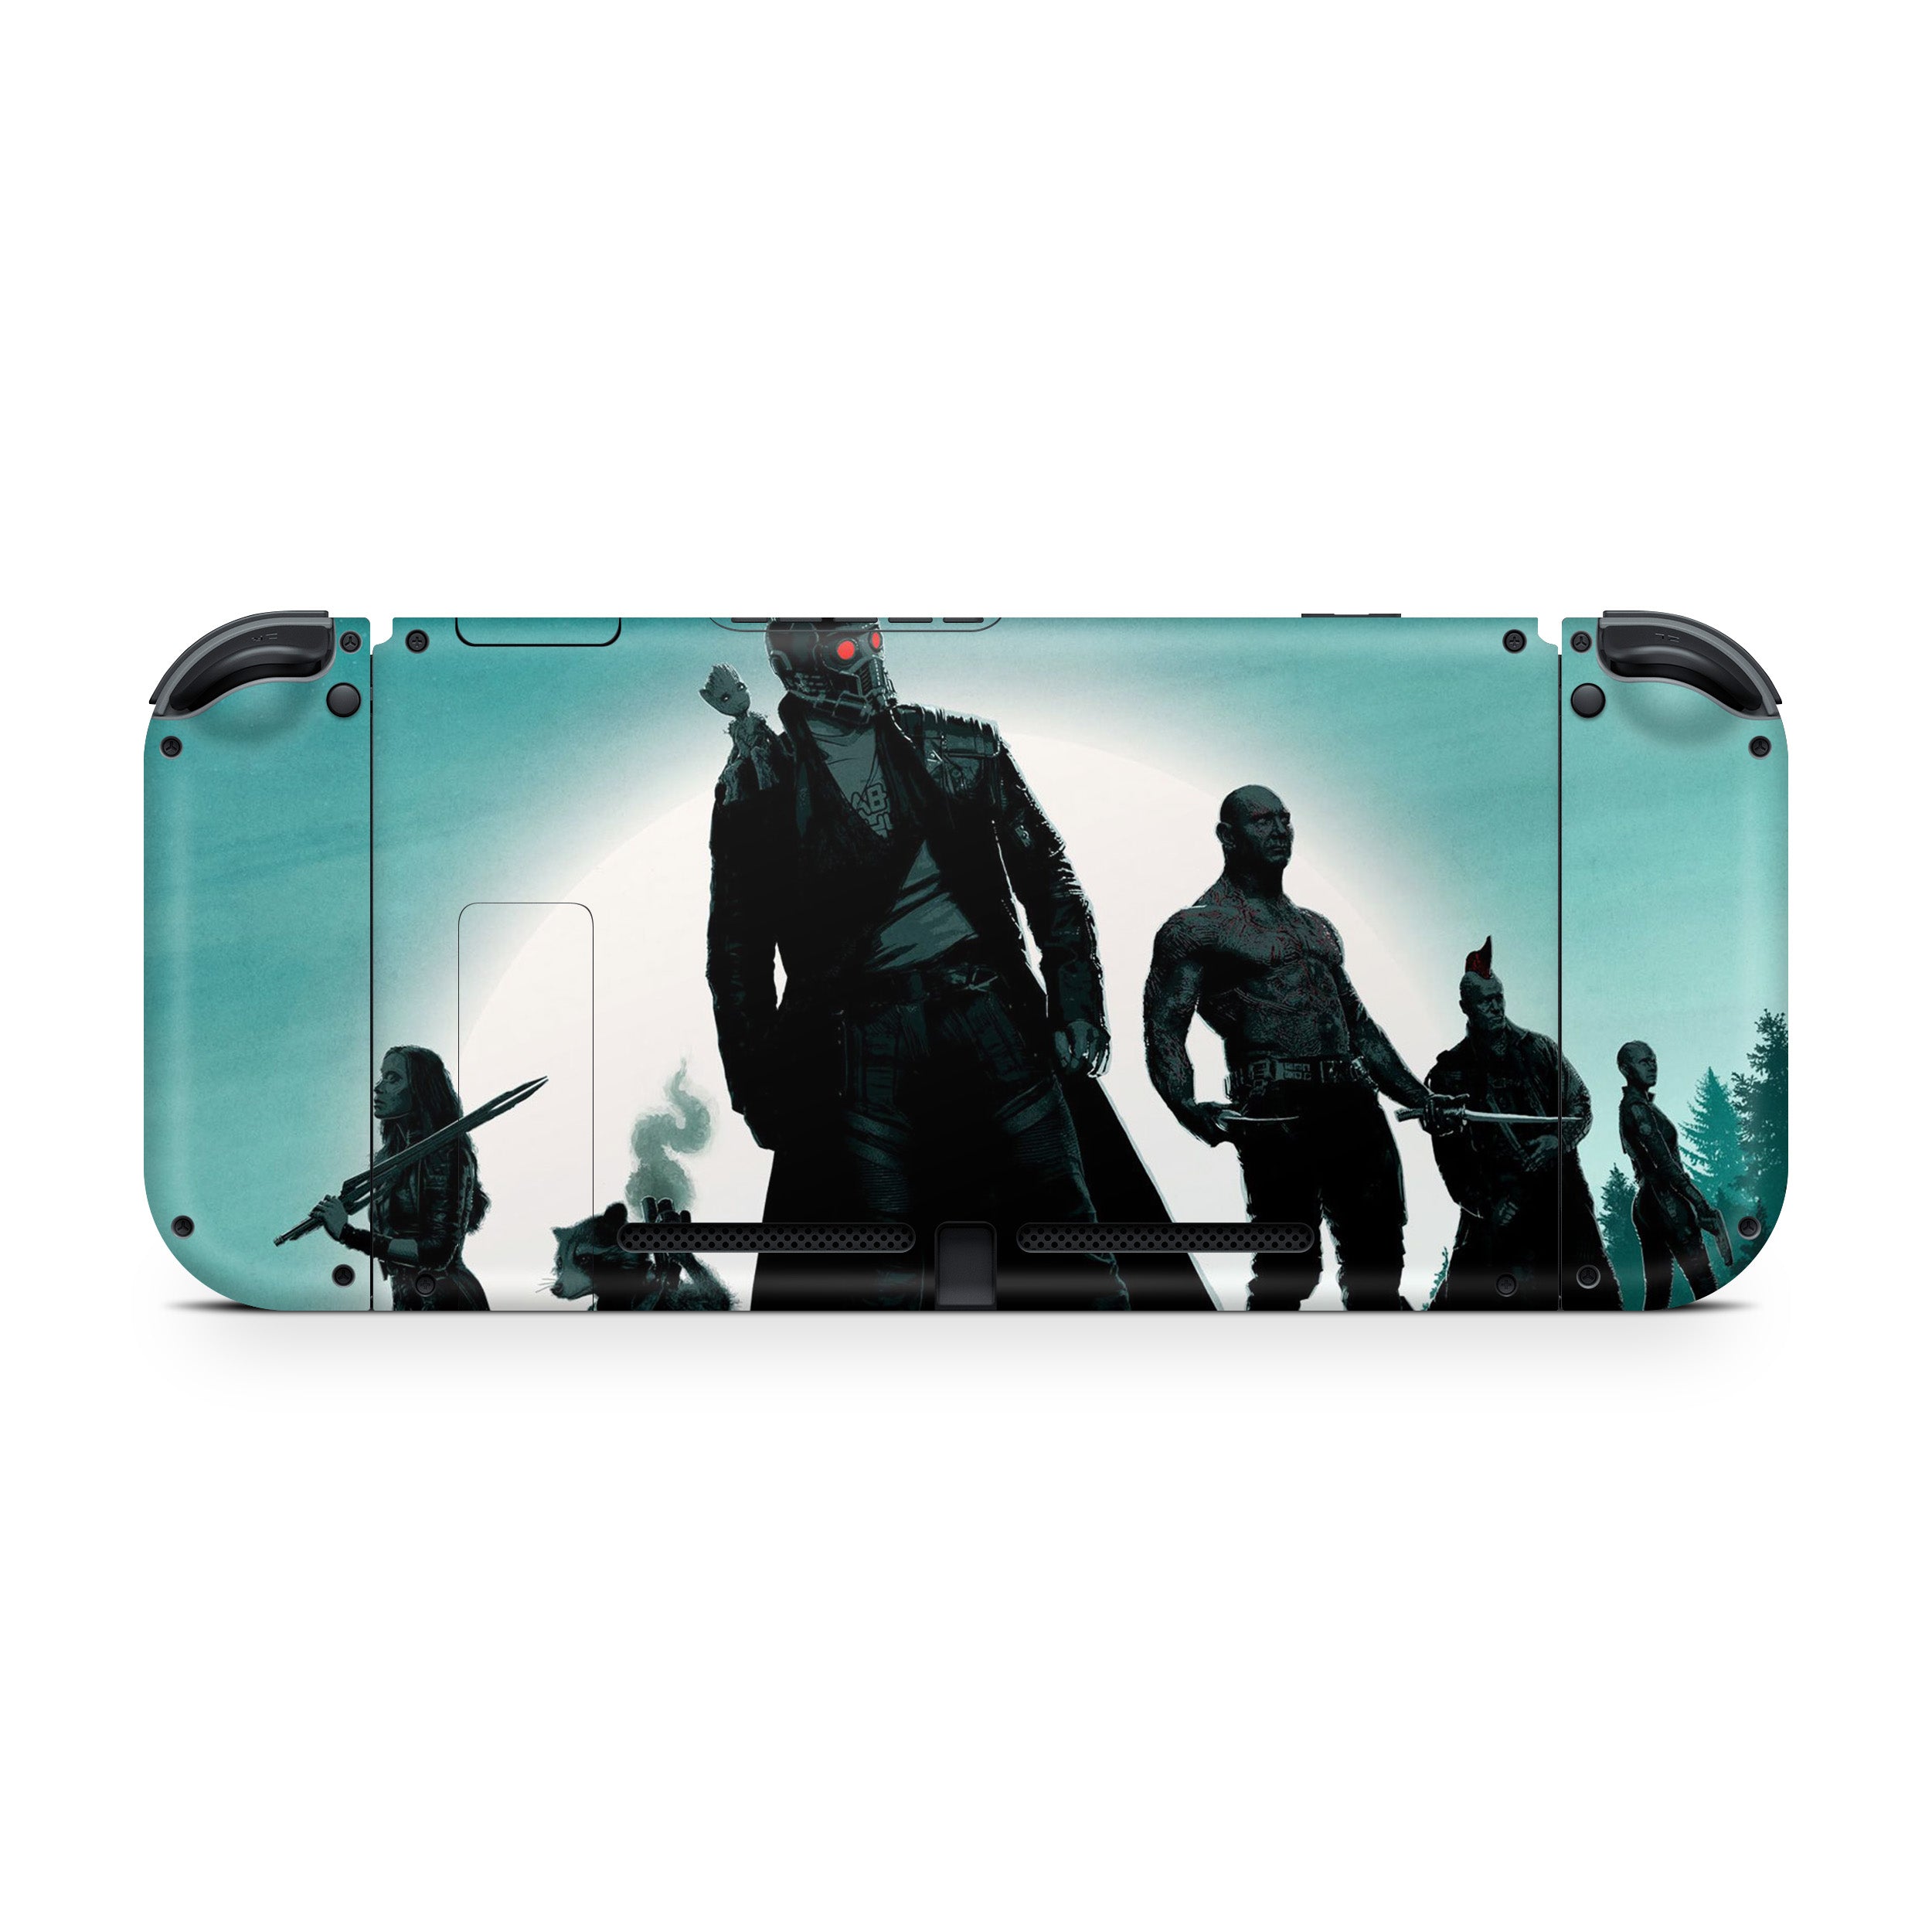 A video game skin featuring a Marvel Guardians of the Galaxy design for the Nintendo Switch.